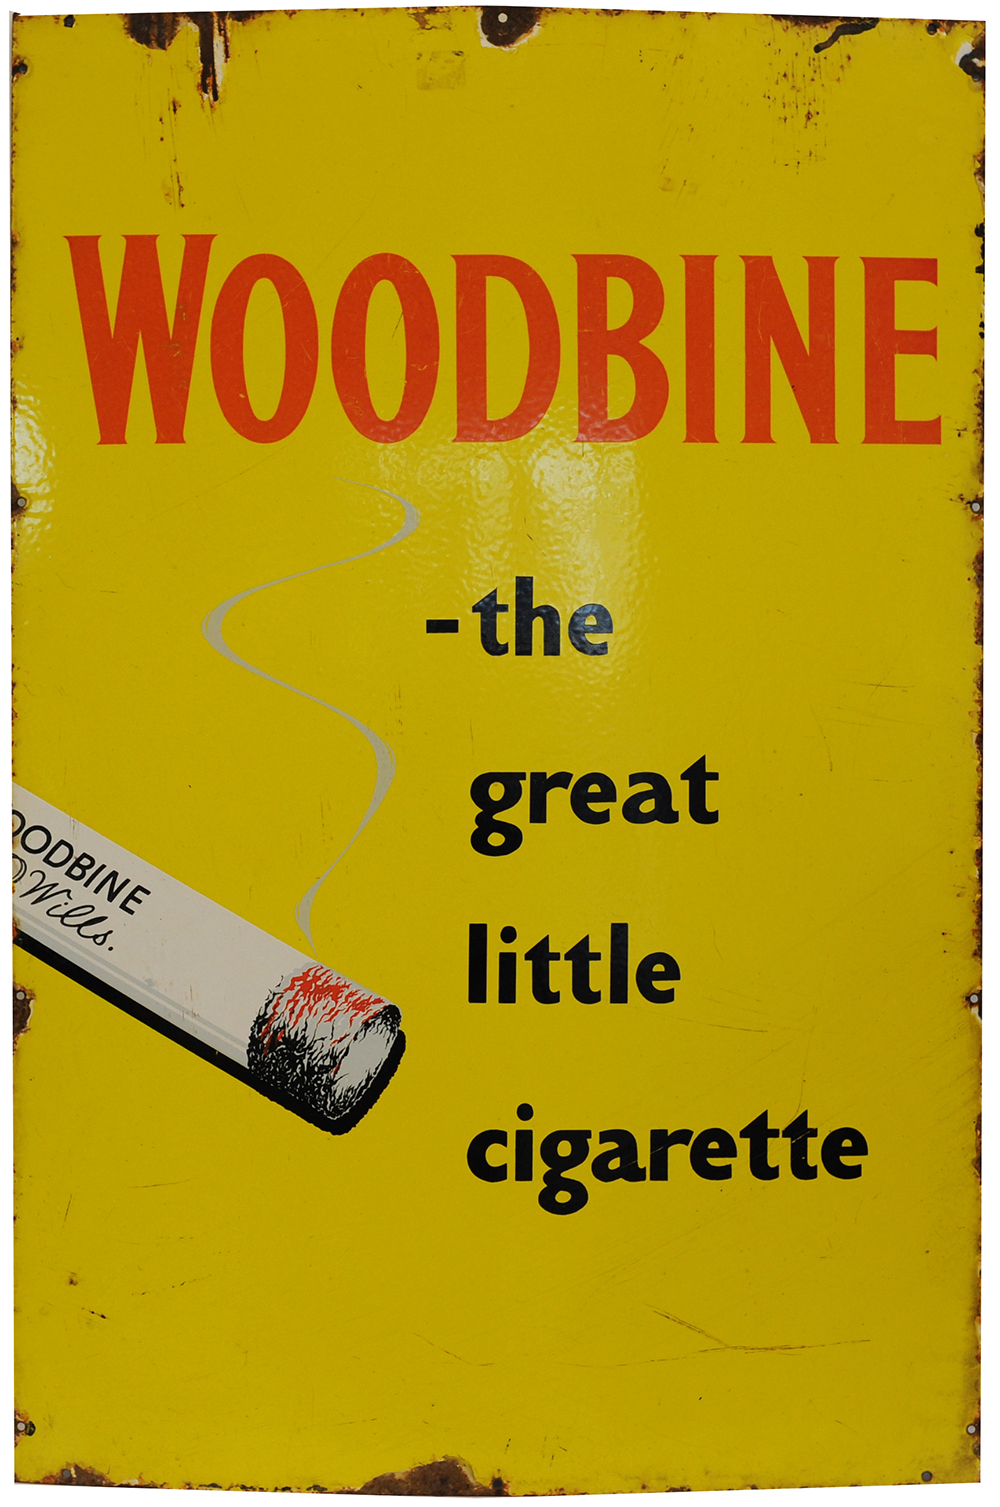 Advertising enamel Sign 'Woodbine The Great Little Cigarette' red, yellow and black, 24in x 37in.